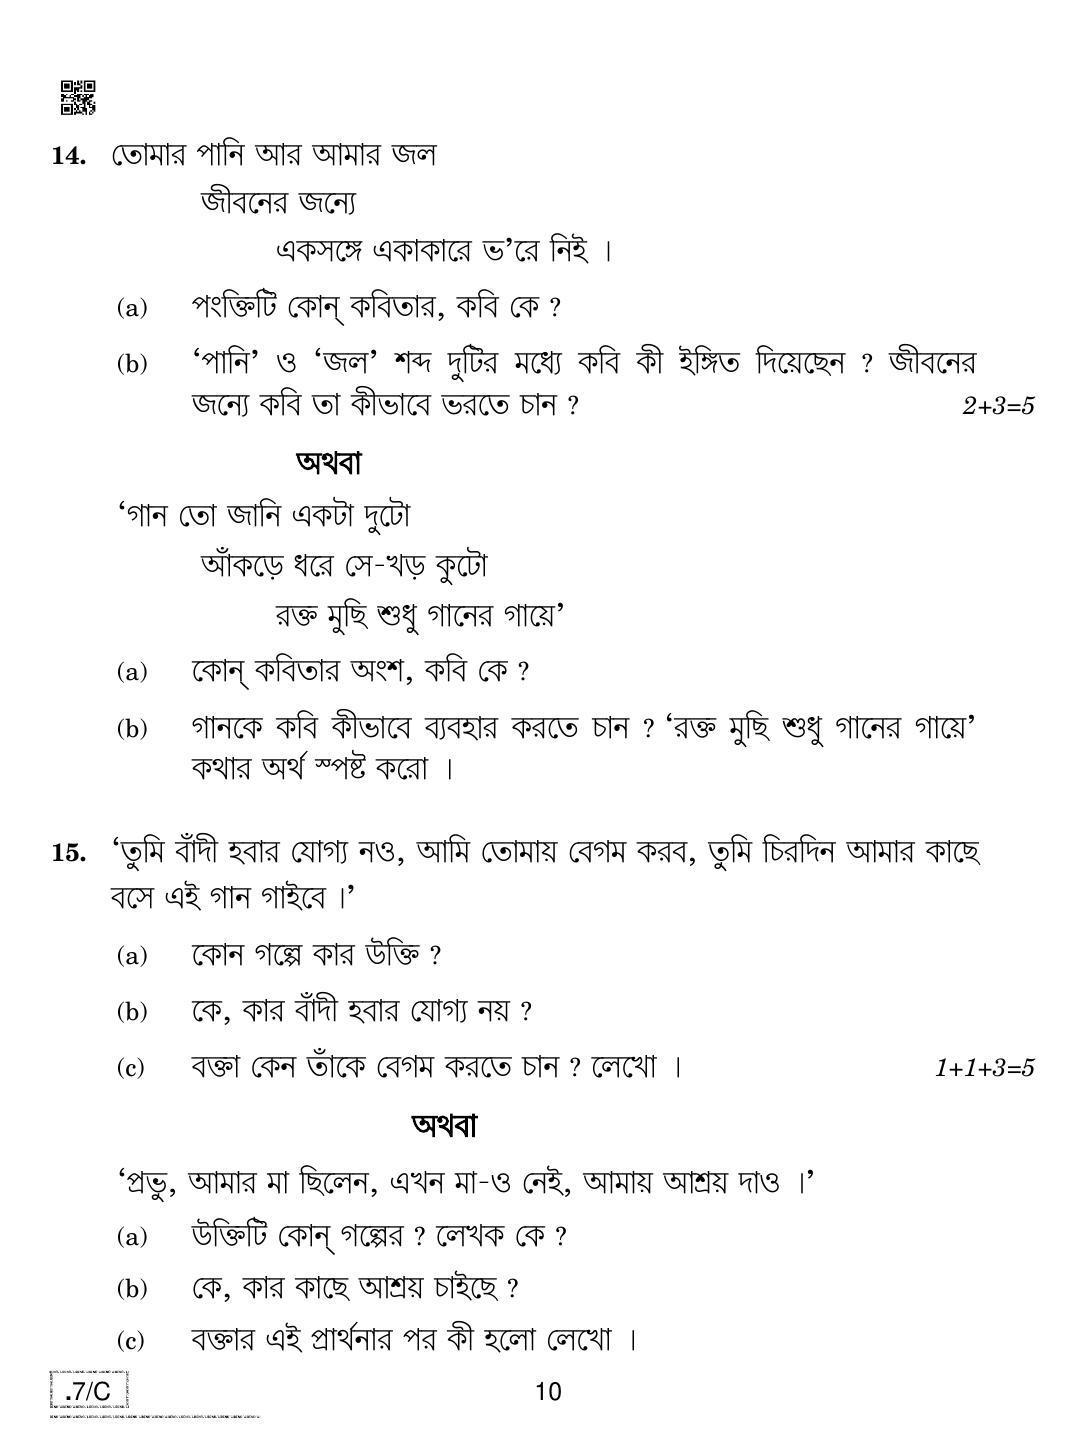 CBSE Class 10 Bengali 2020 Compartment Question Paper - Page 10